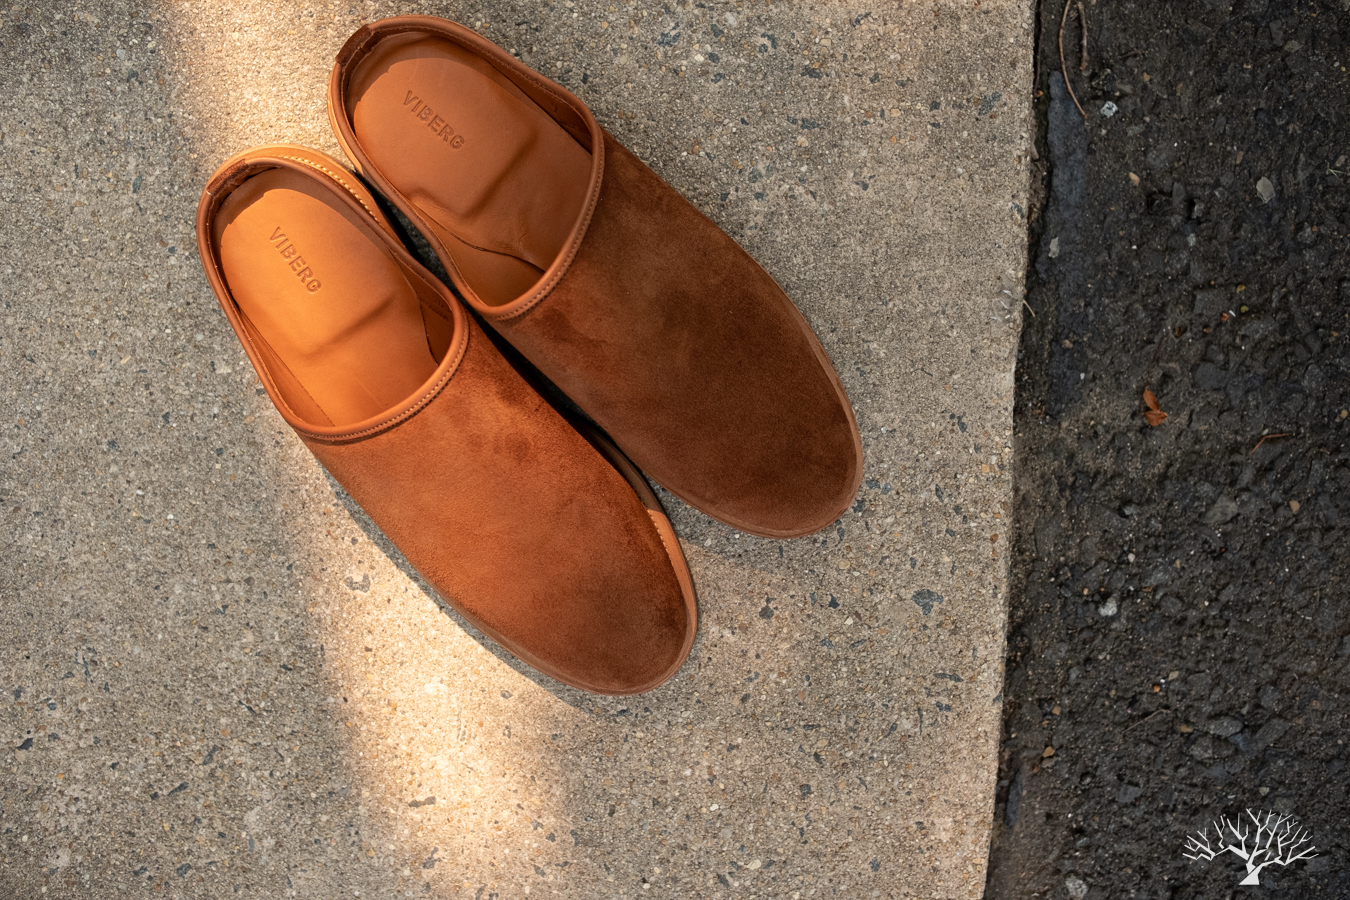 Viberg for Withered Fig Mule Chestnut Calf Suede